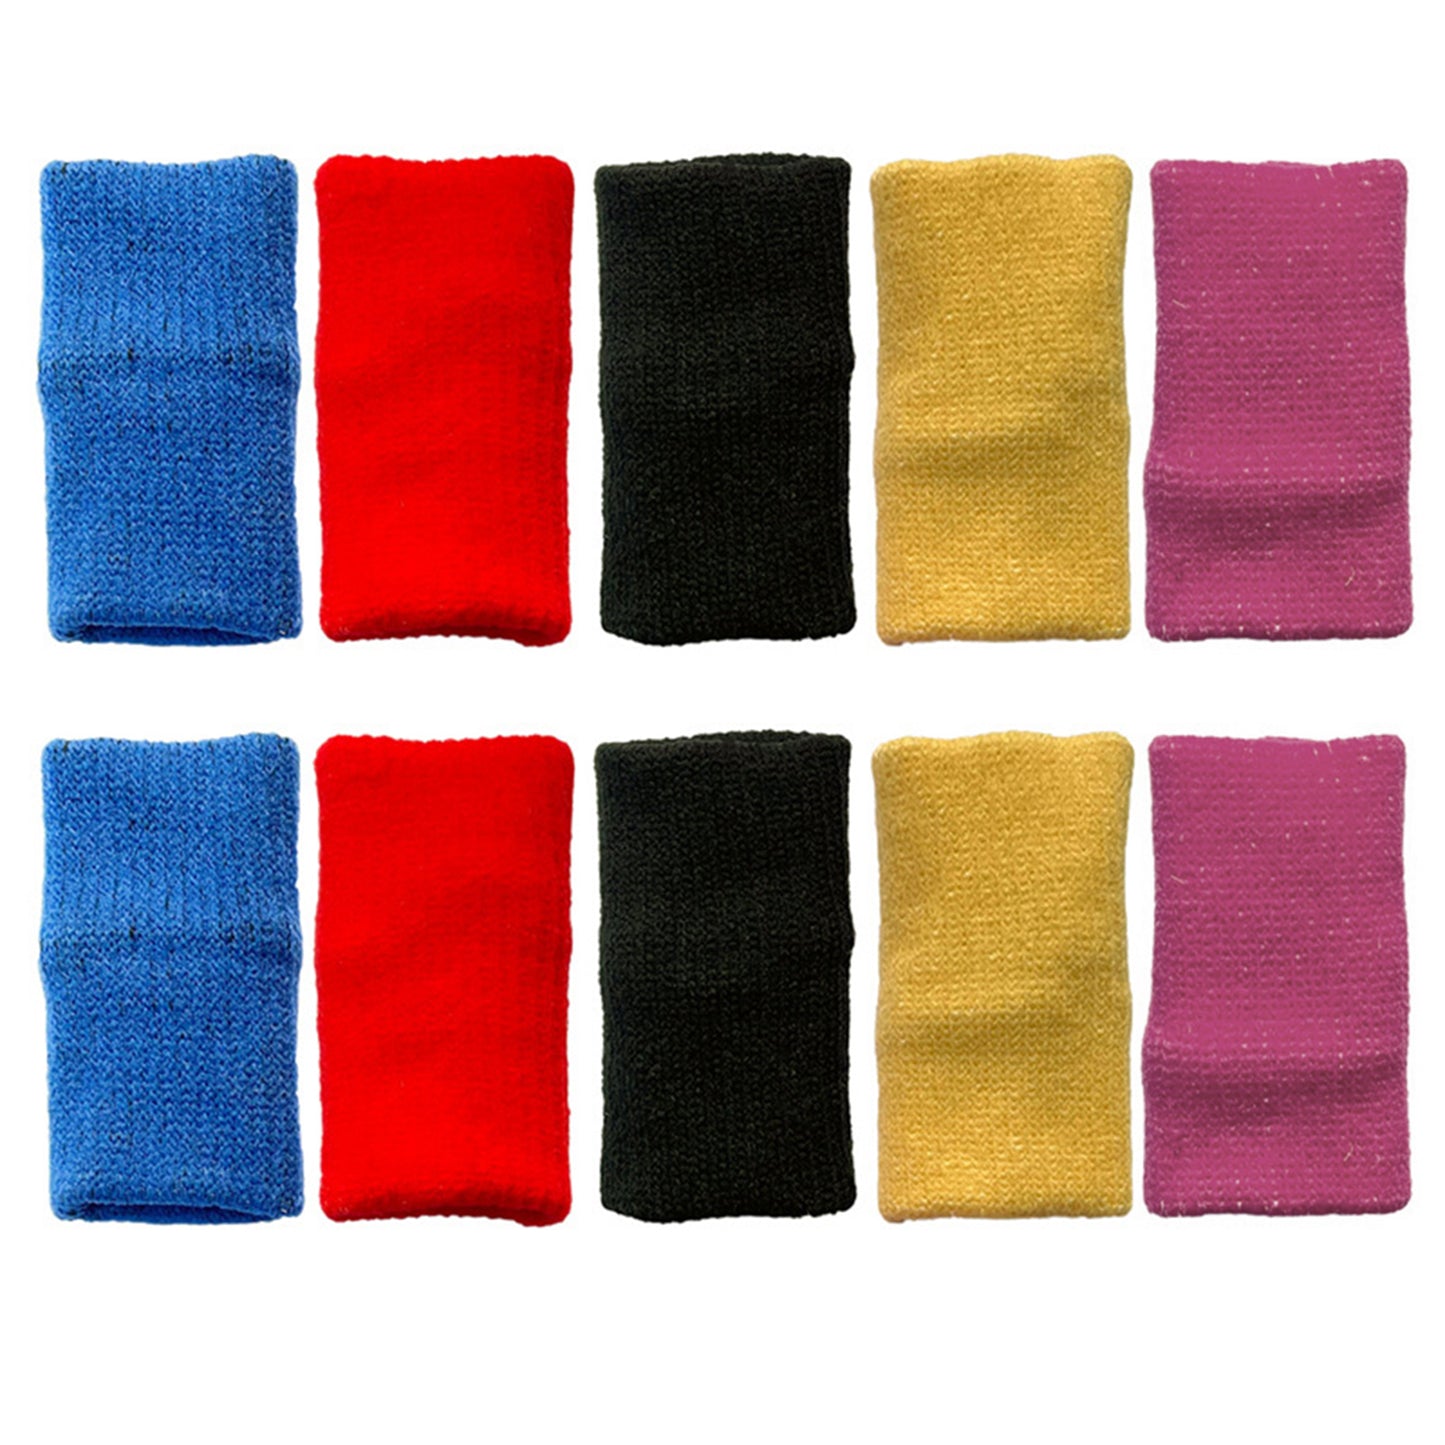 5/10pcs Stretchy Sports Finger Sleeves Arthritis Support Finger Guard for Protection Safety 5D Diamond Painting Tools